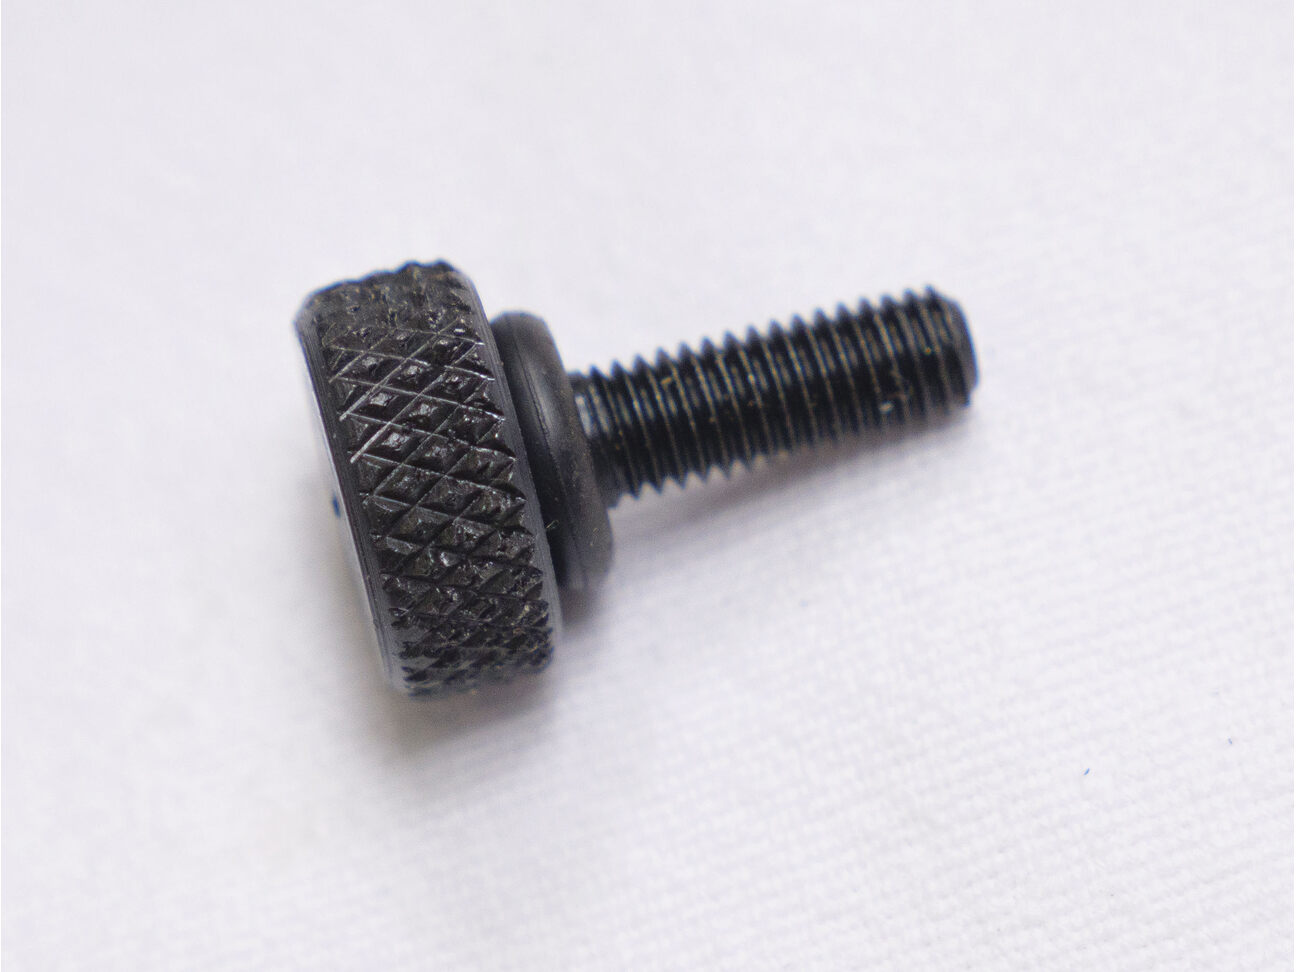 Rear grip frame thumb screw for Spyder Classic. Steel, new